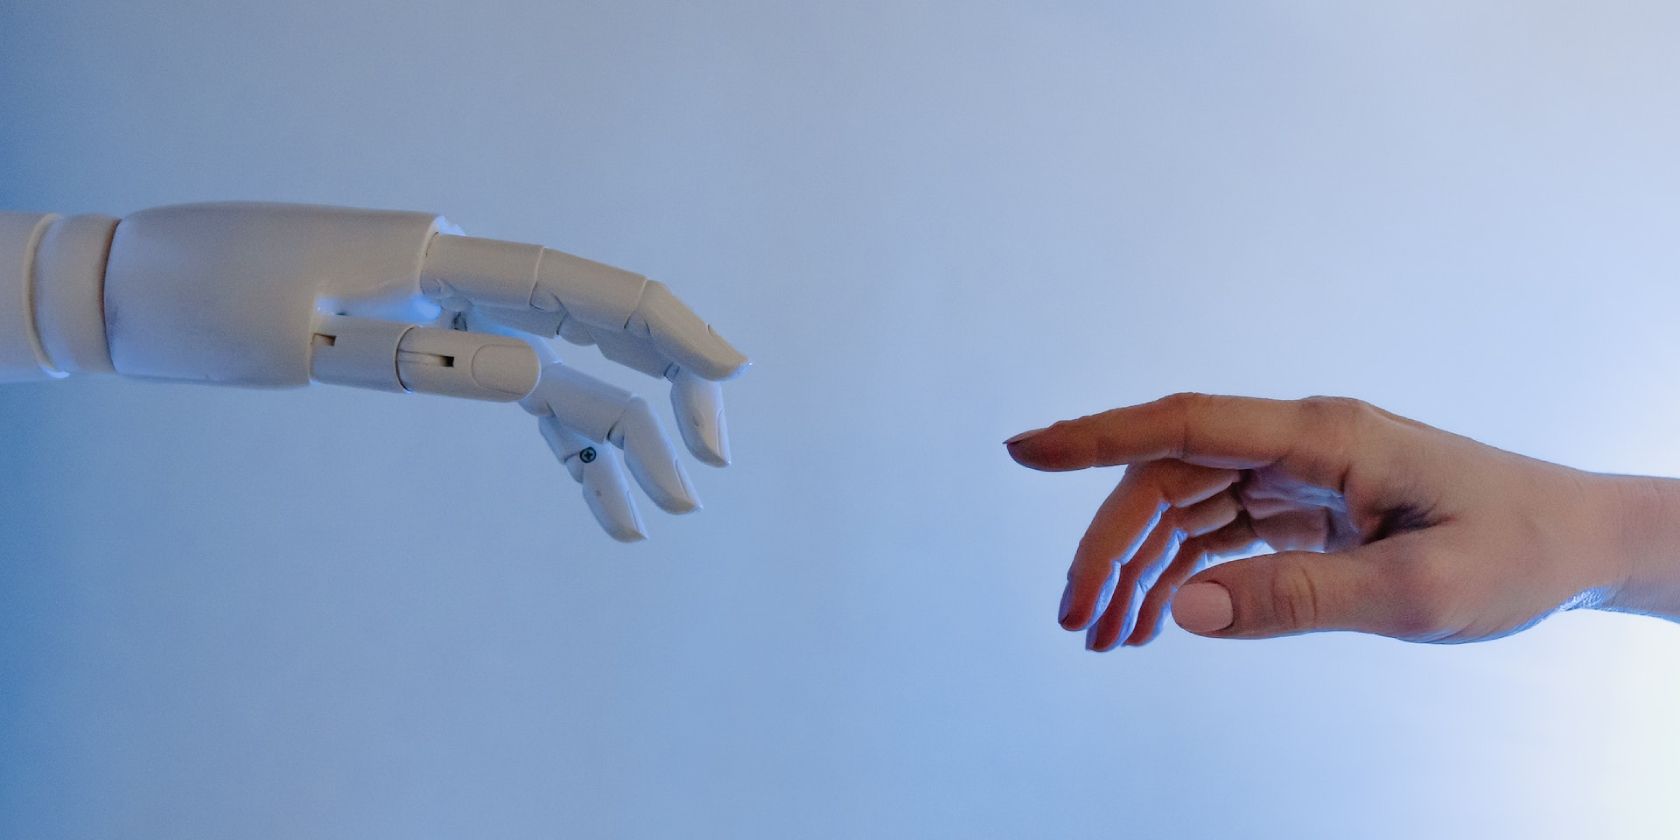 White robotic arm reaching out to human hand in front of a blue surface